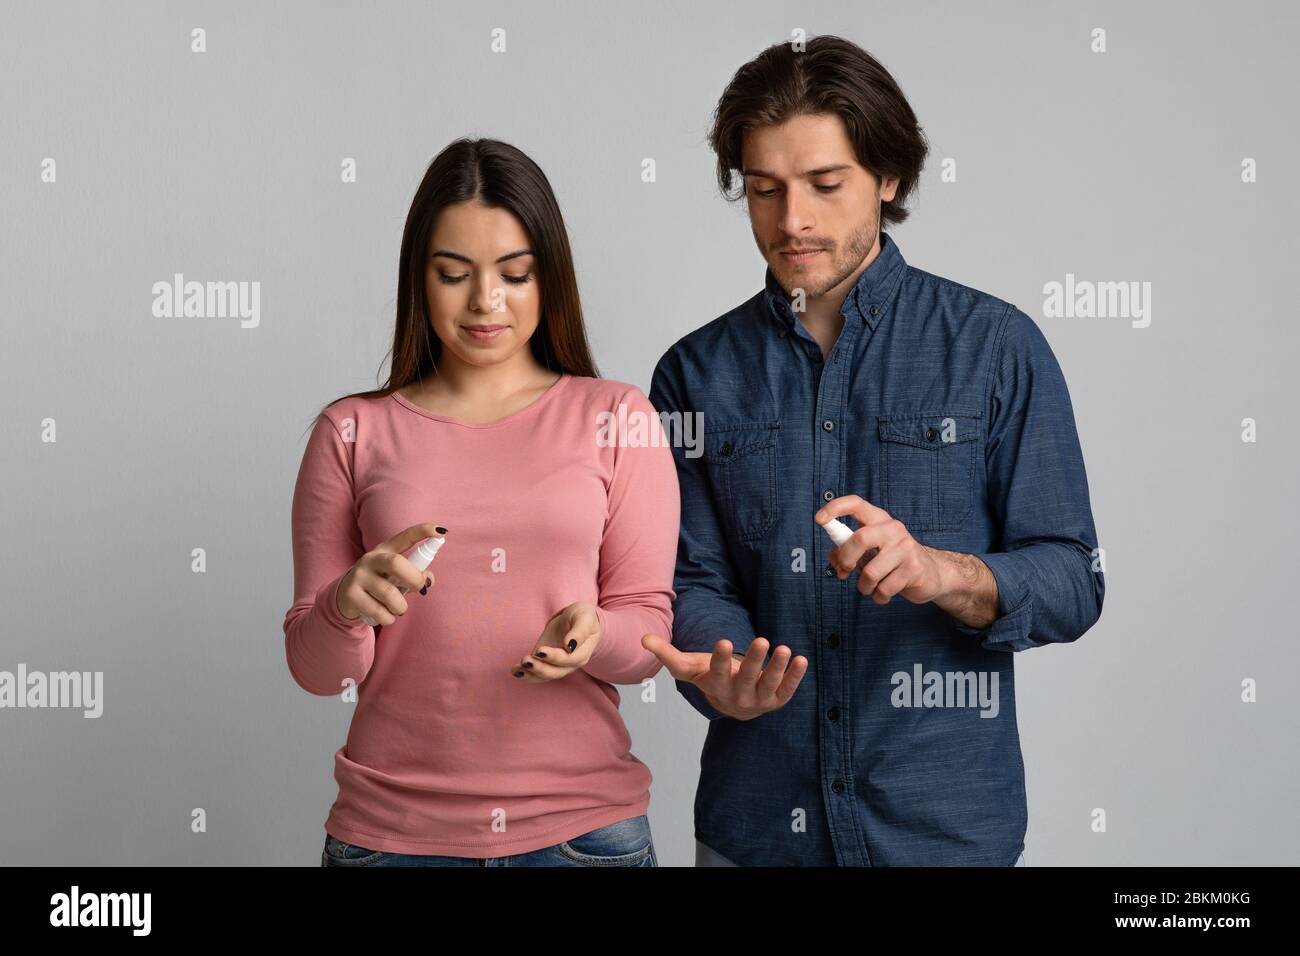 Precautions During Coronavirus Outbreak. Young couple applying disinfectant spray on hands Stock Photo